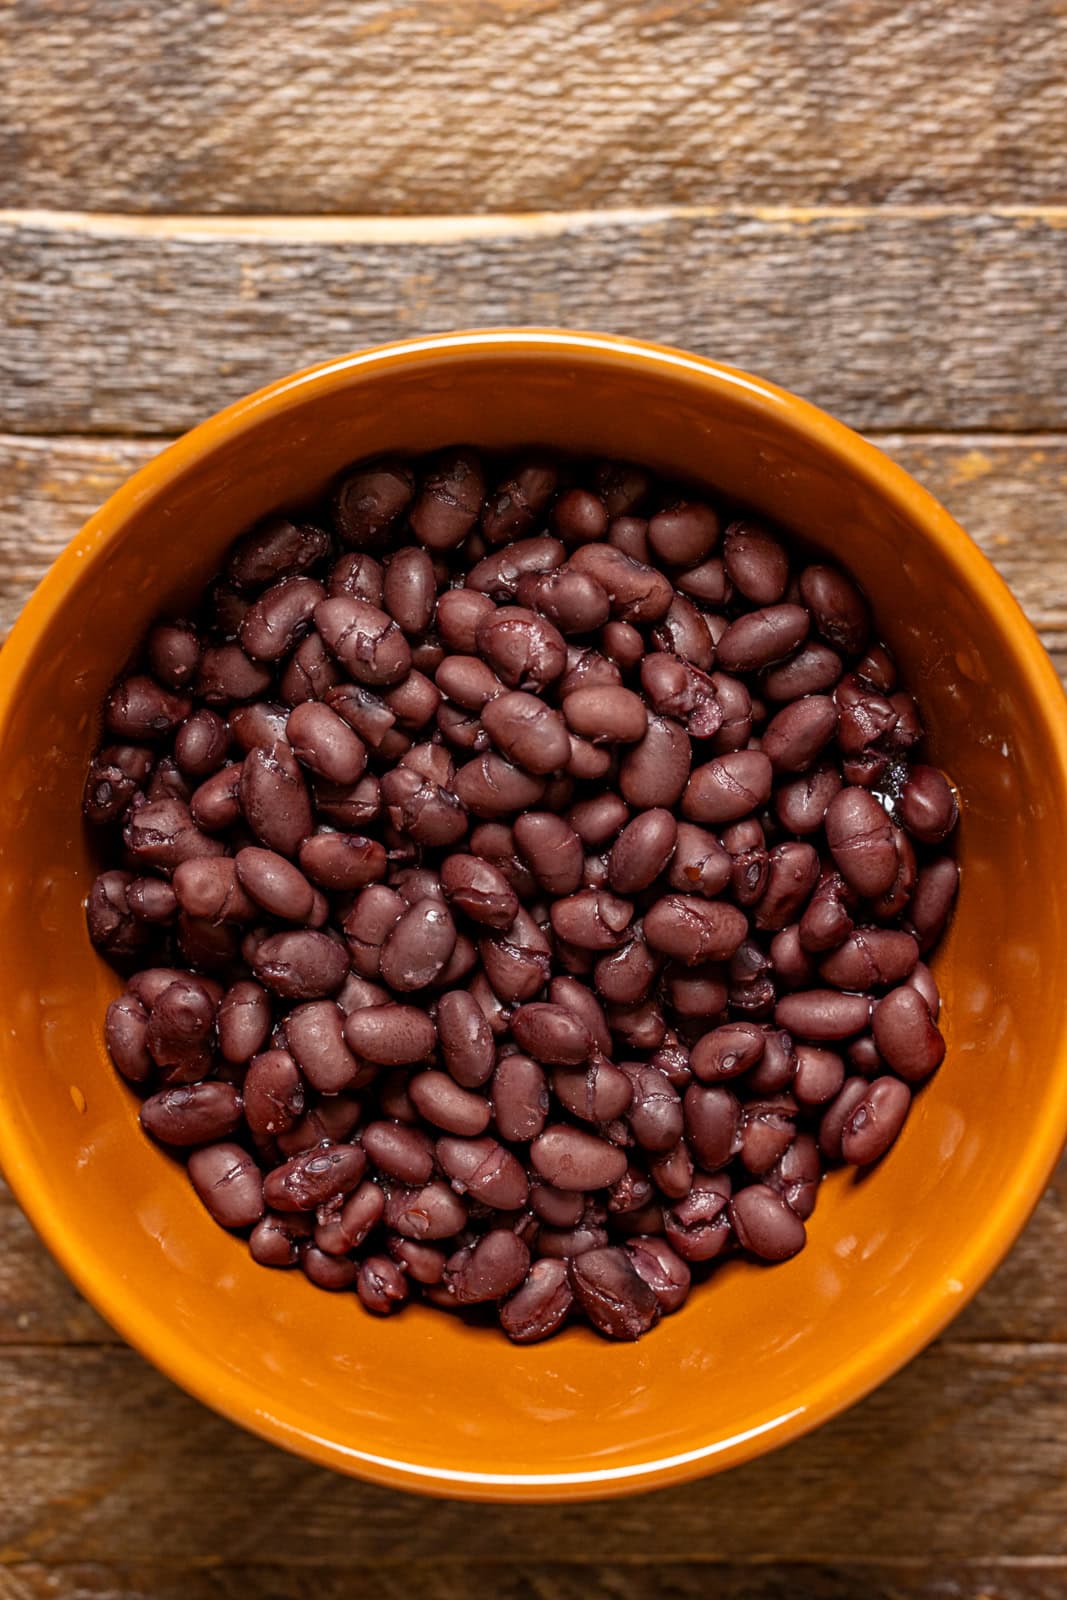 Drained + rinsed Black beans in a bowl.